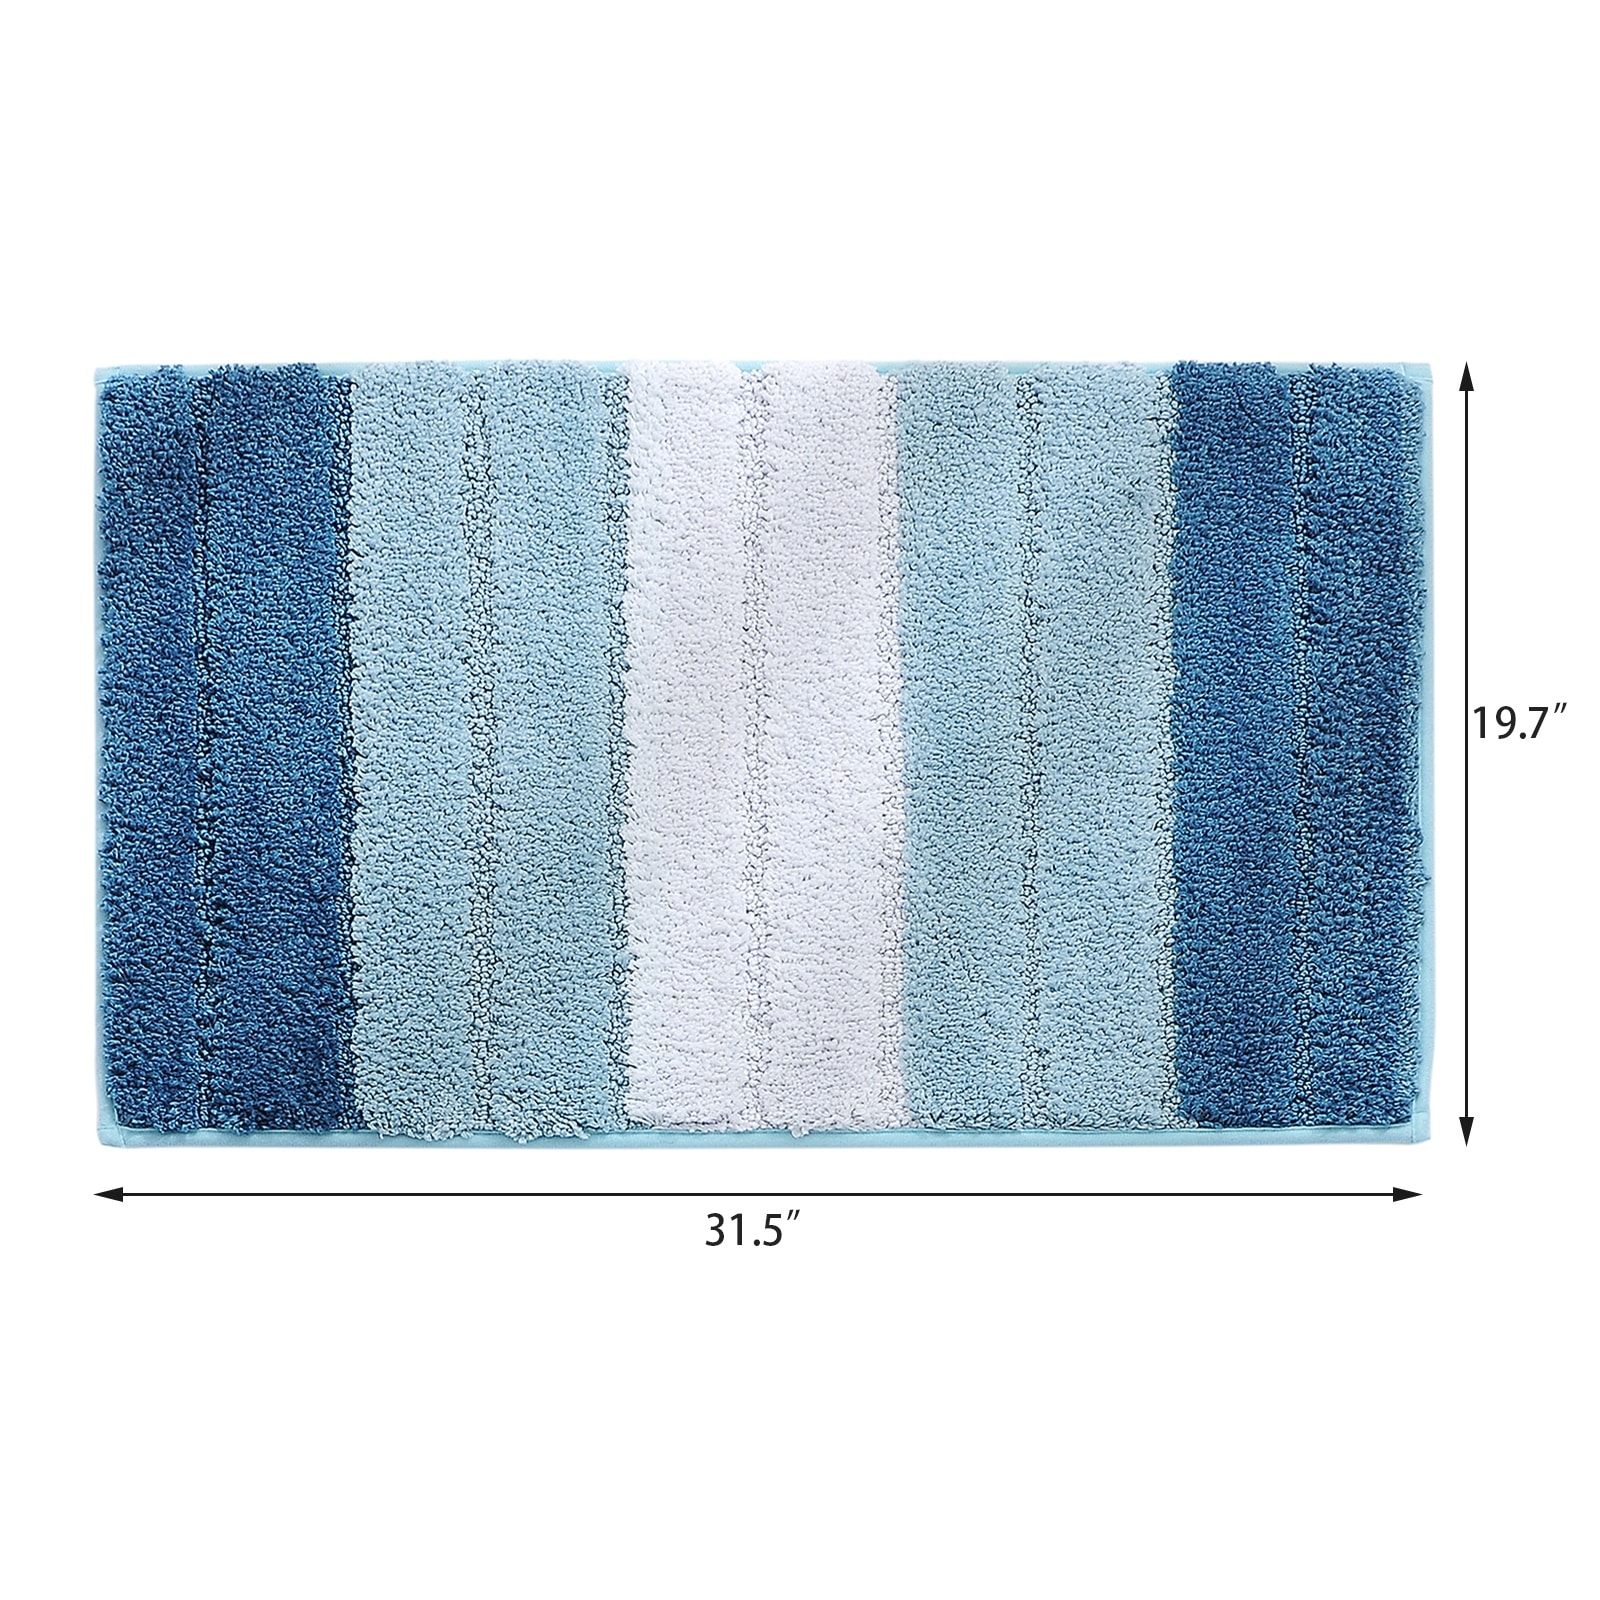 https://ak1.ostkcdn.com/images/products/is/images/direct/d6a14e2c219647600fa95e848dc5169083ad52f3/Striped-Bath-Rugs-Bathroom-Mat-Water-Absorbent-Non-Slip-Backing-Pads.jpg